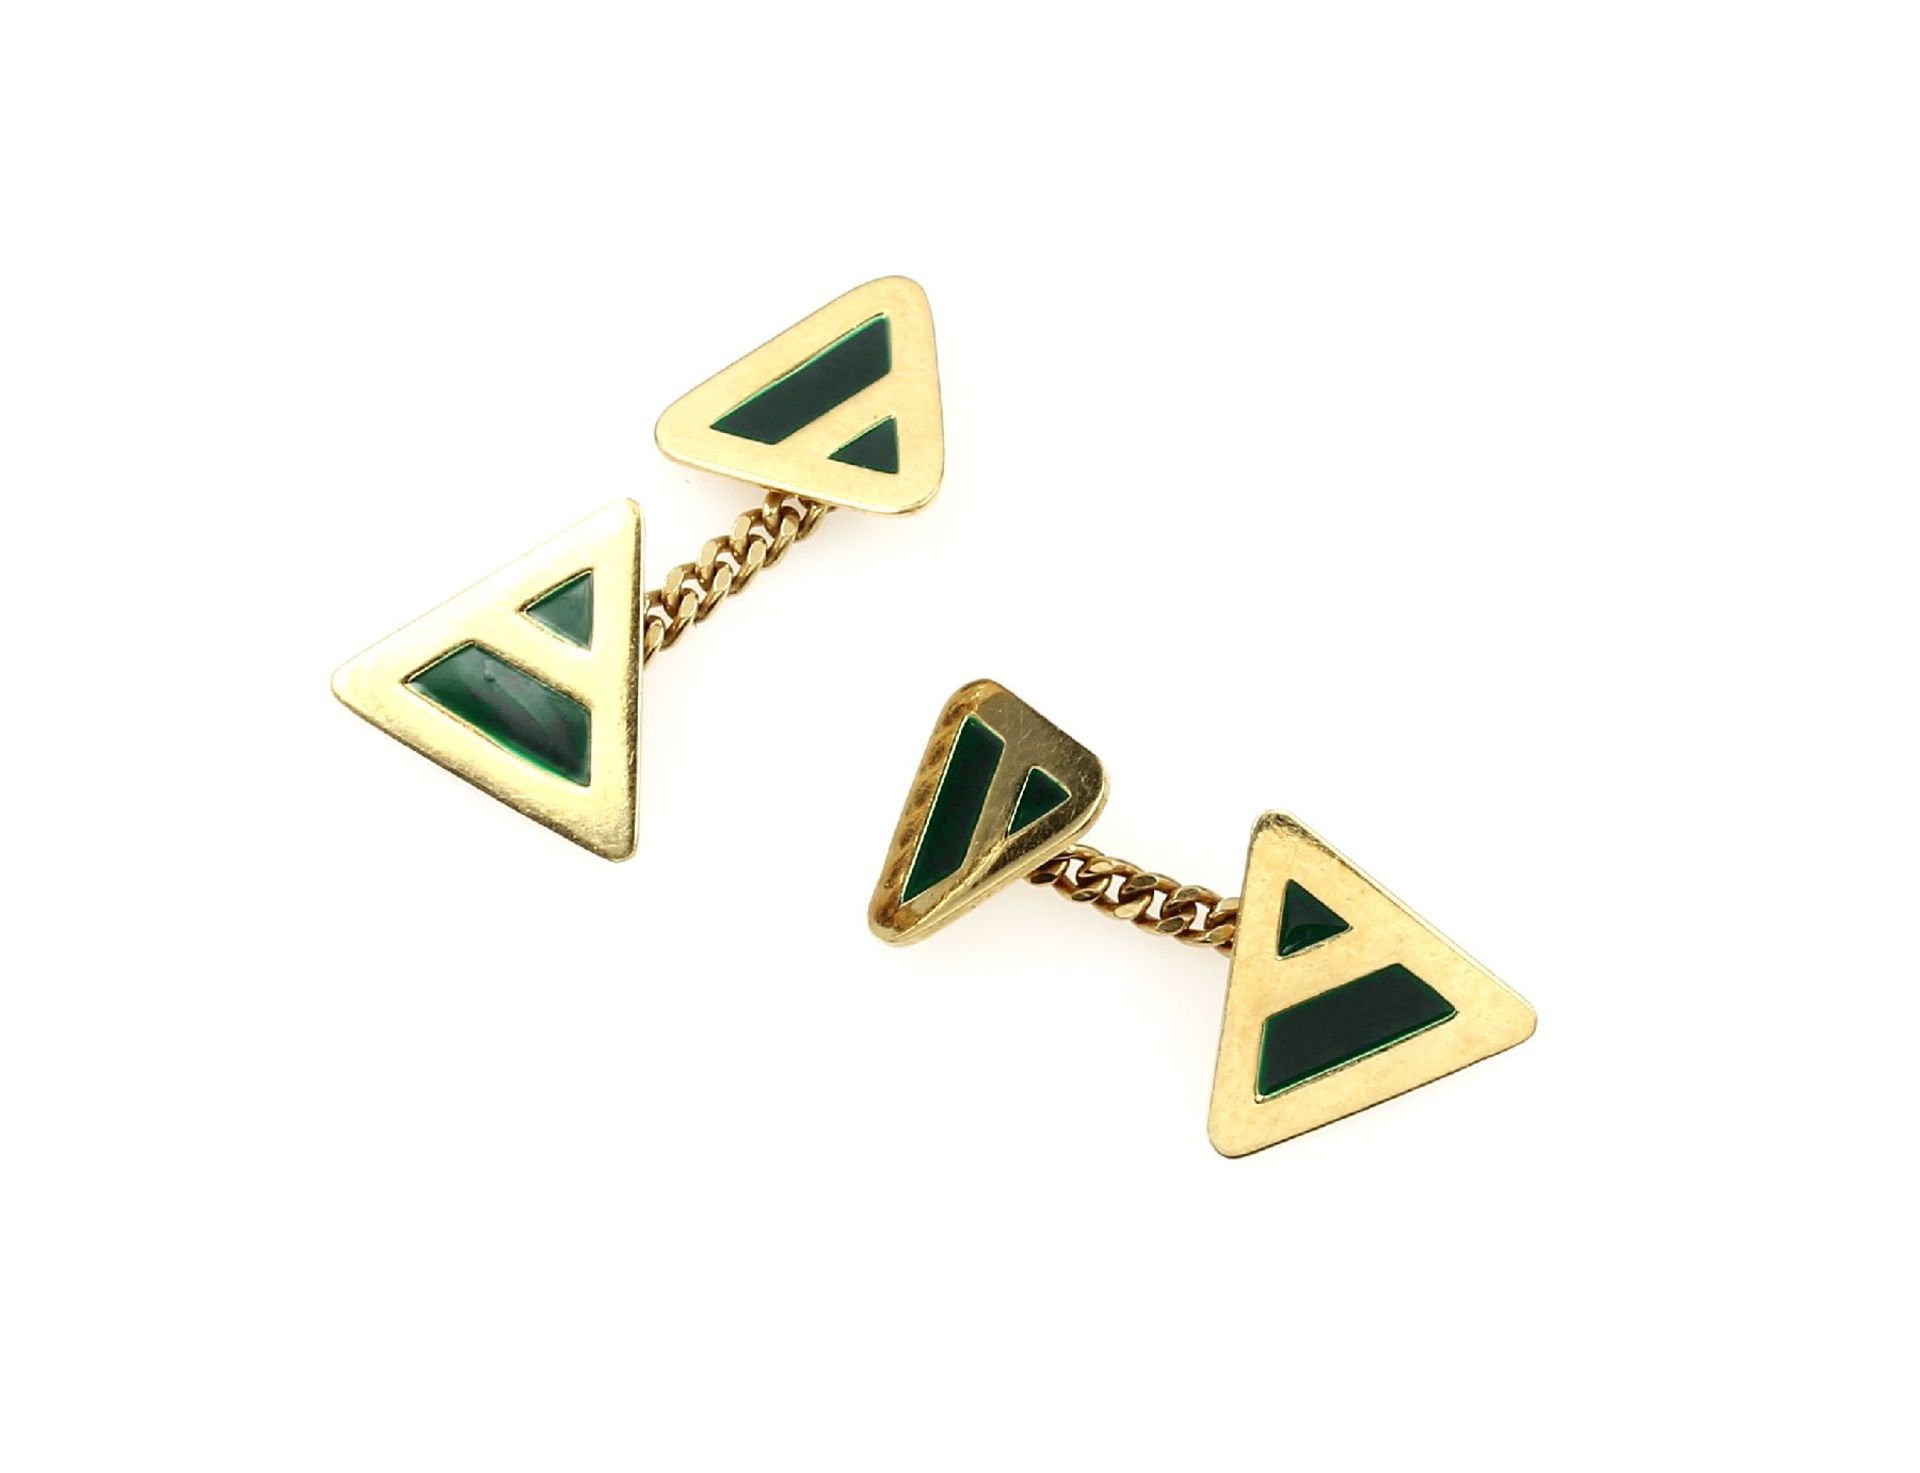 Pair of 18 kt gold cufflinks with enamel , YG 750/000, signed MANFREDI, triangle shape, green